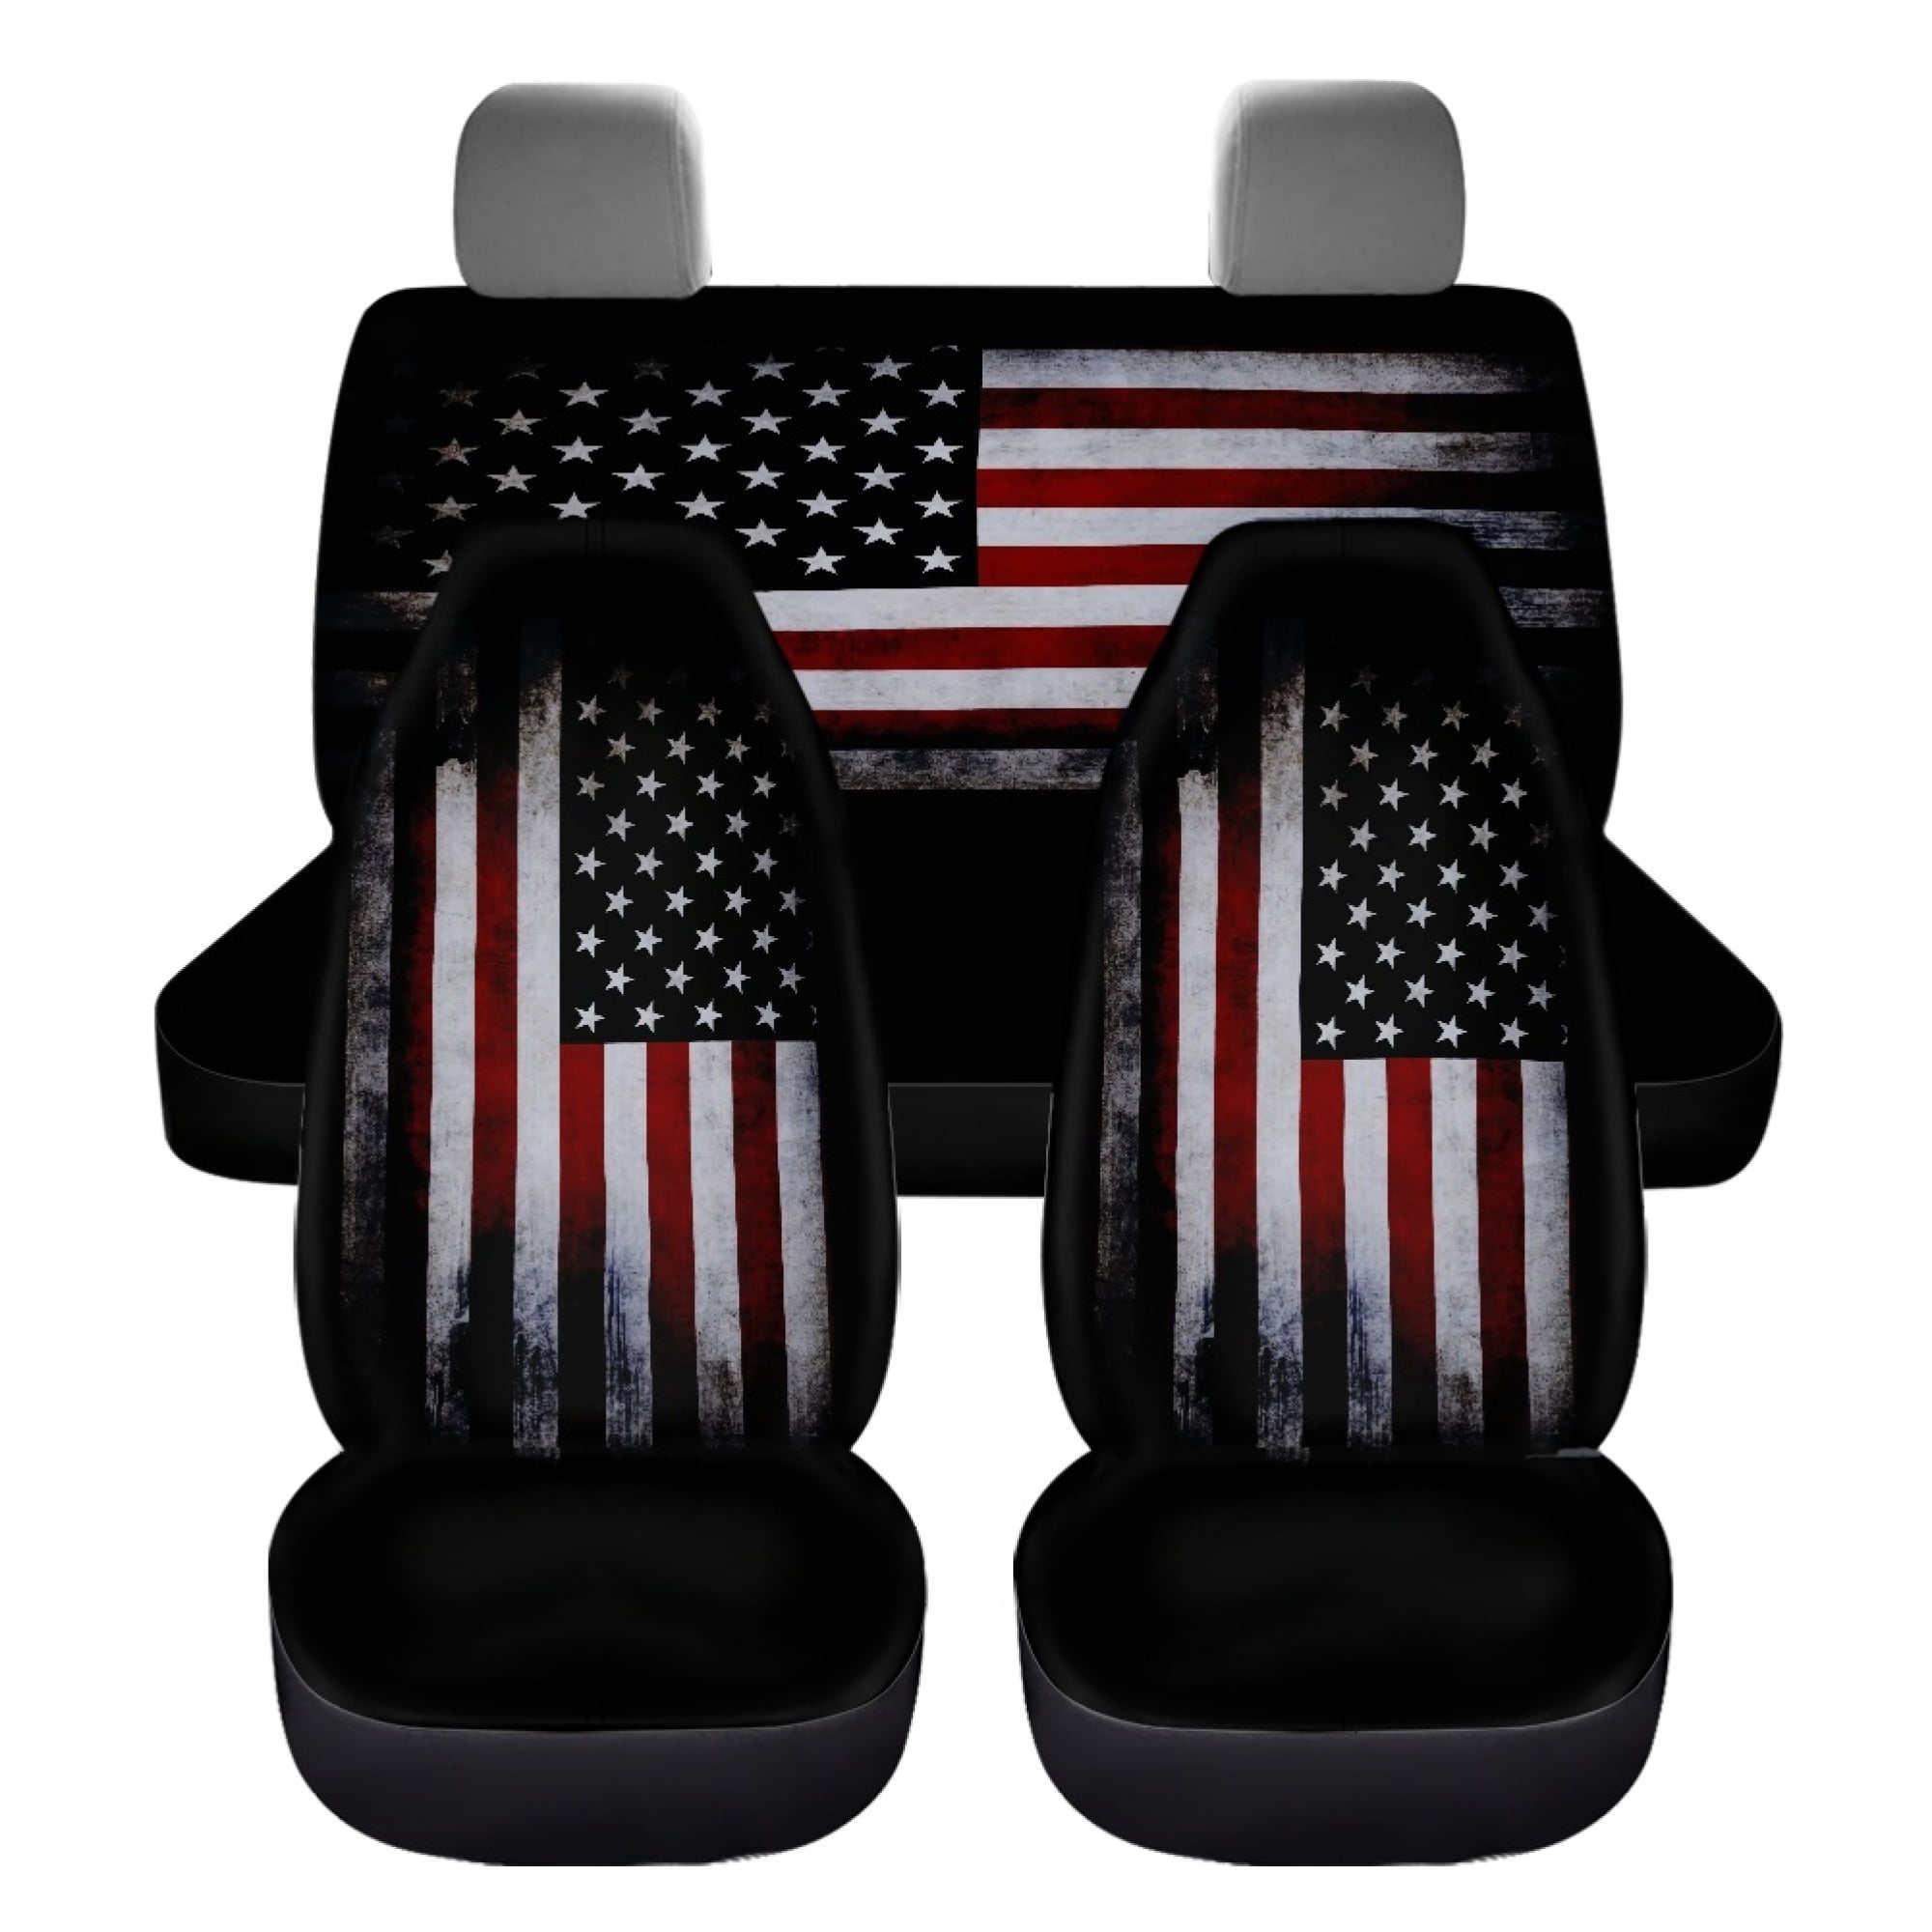 Pzuqiu Camo Seat Covers for Truck Full Set 11 Pcs Deer Car Accessories for  Women Steering Wheel Cover American Flag Keychain Girly Seat Covers for  Cars Seatbelt Cover Brown Vehicle Cup Holder